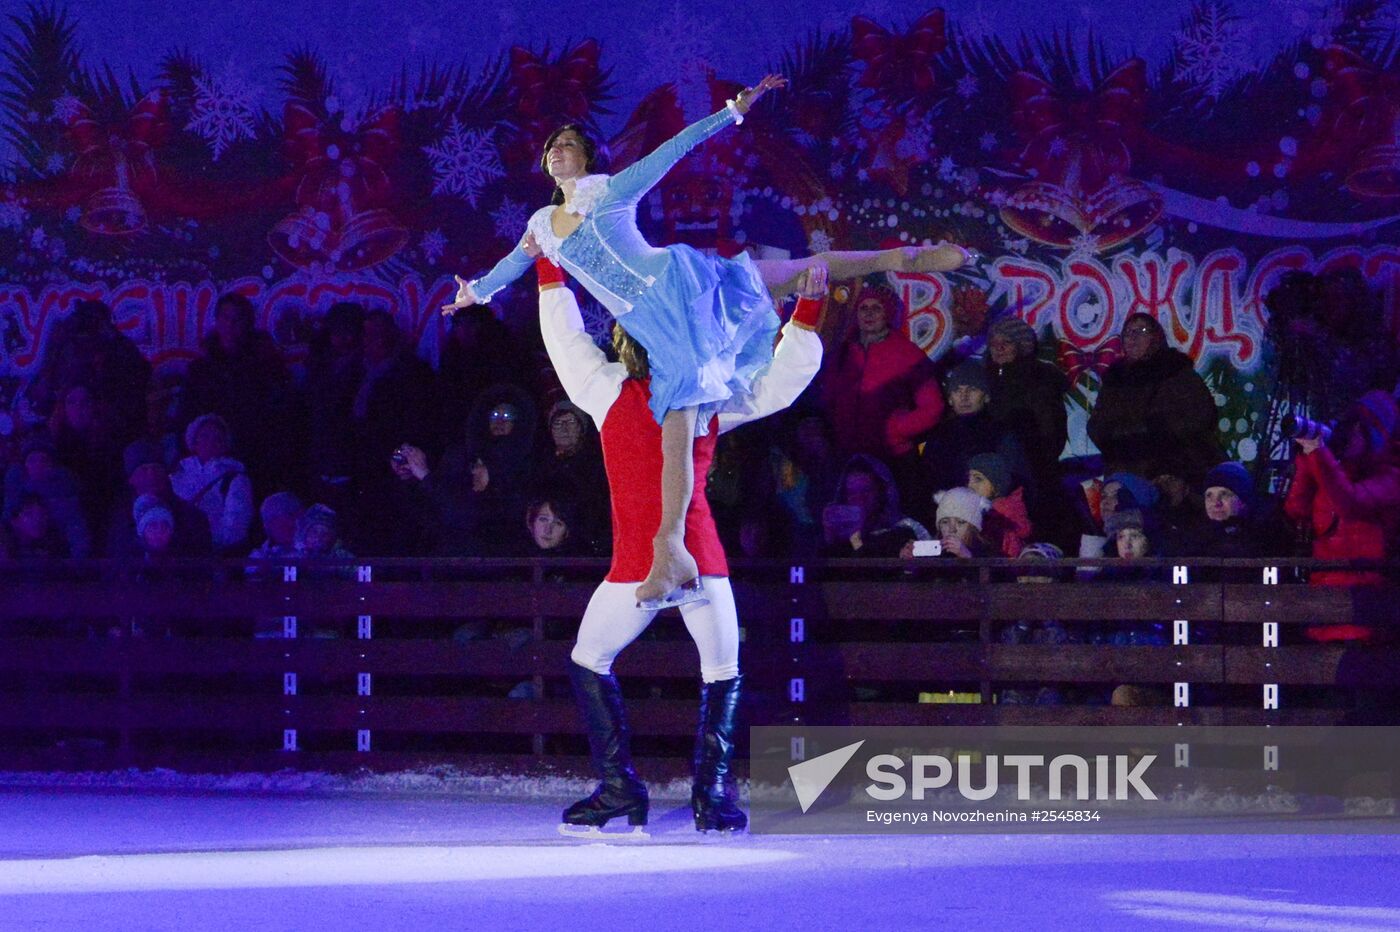 The Nutcracker ice show as part of Journey to Christmas festival